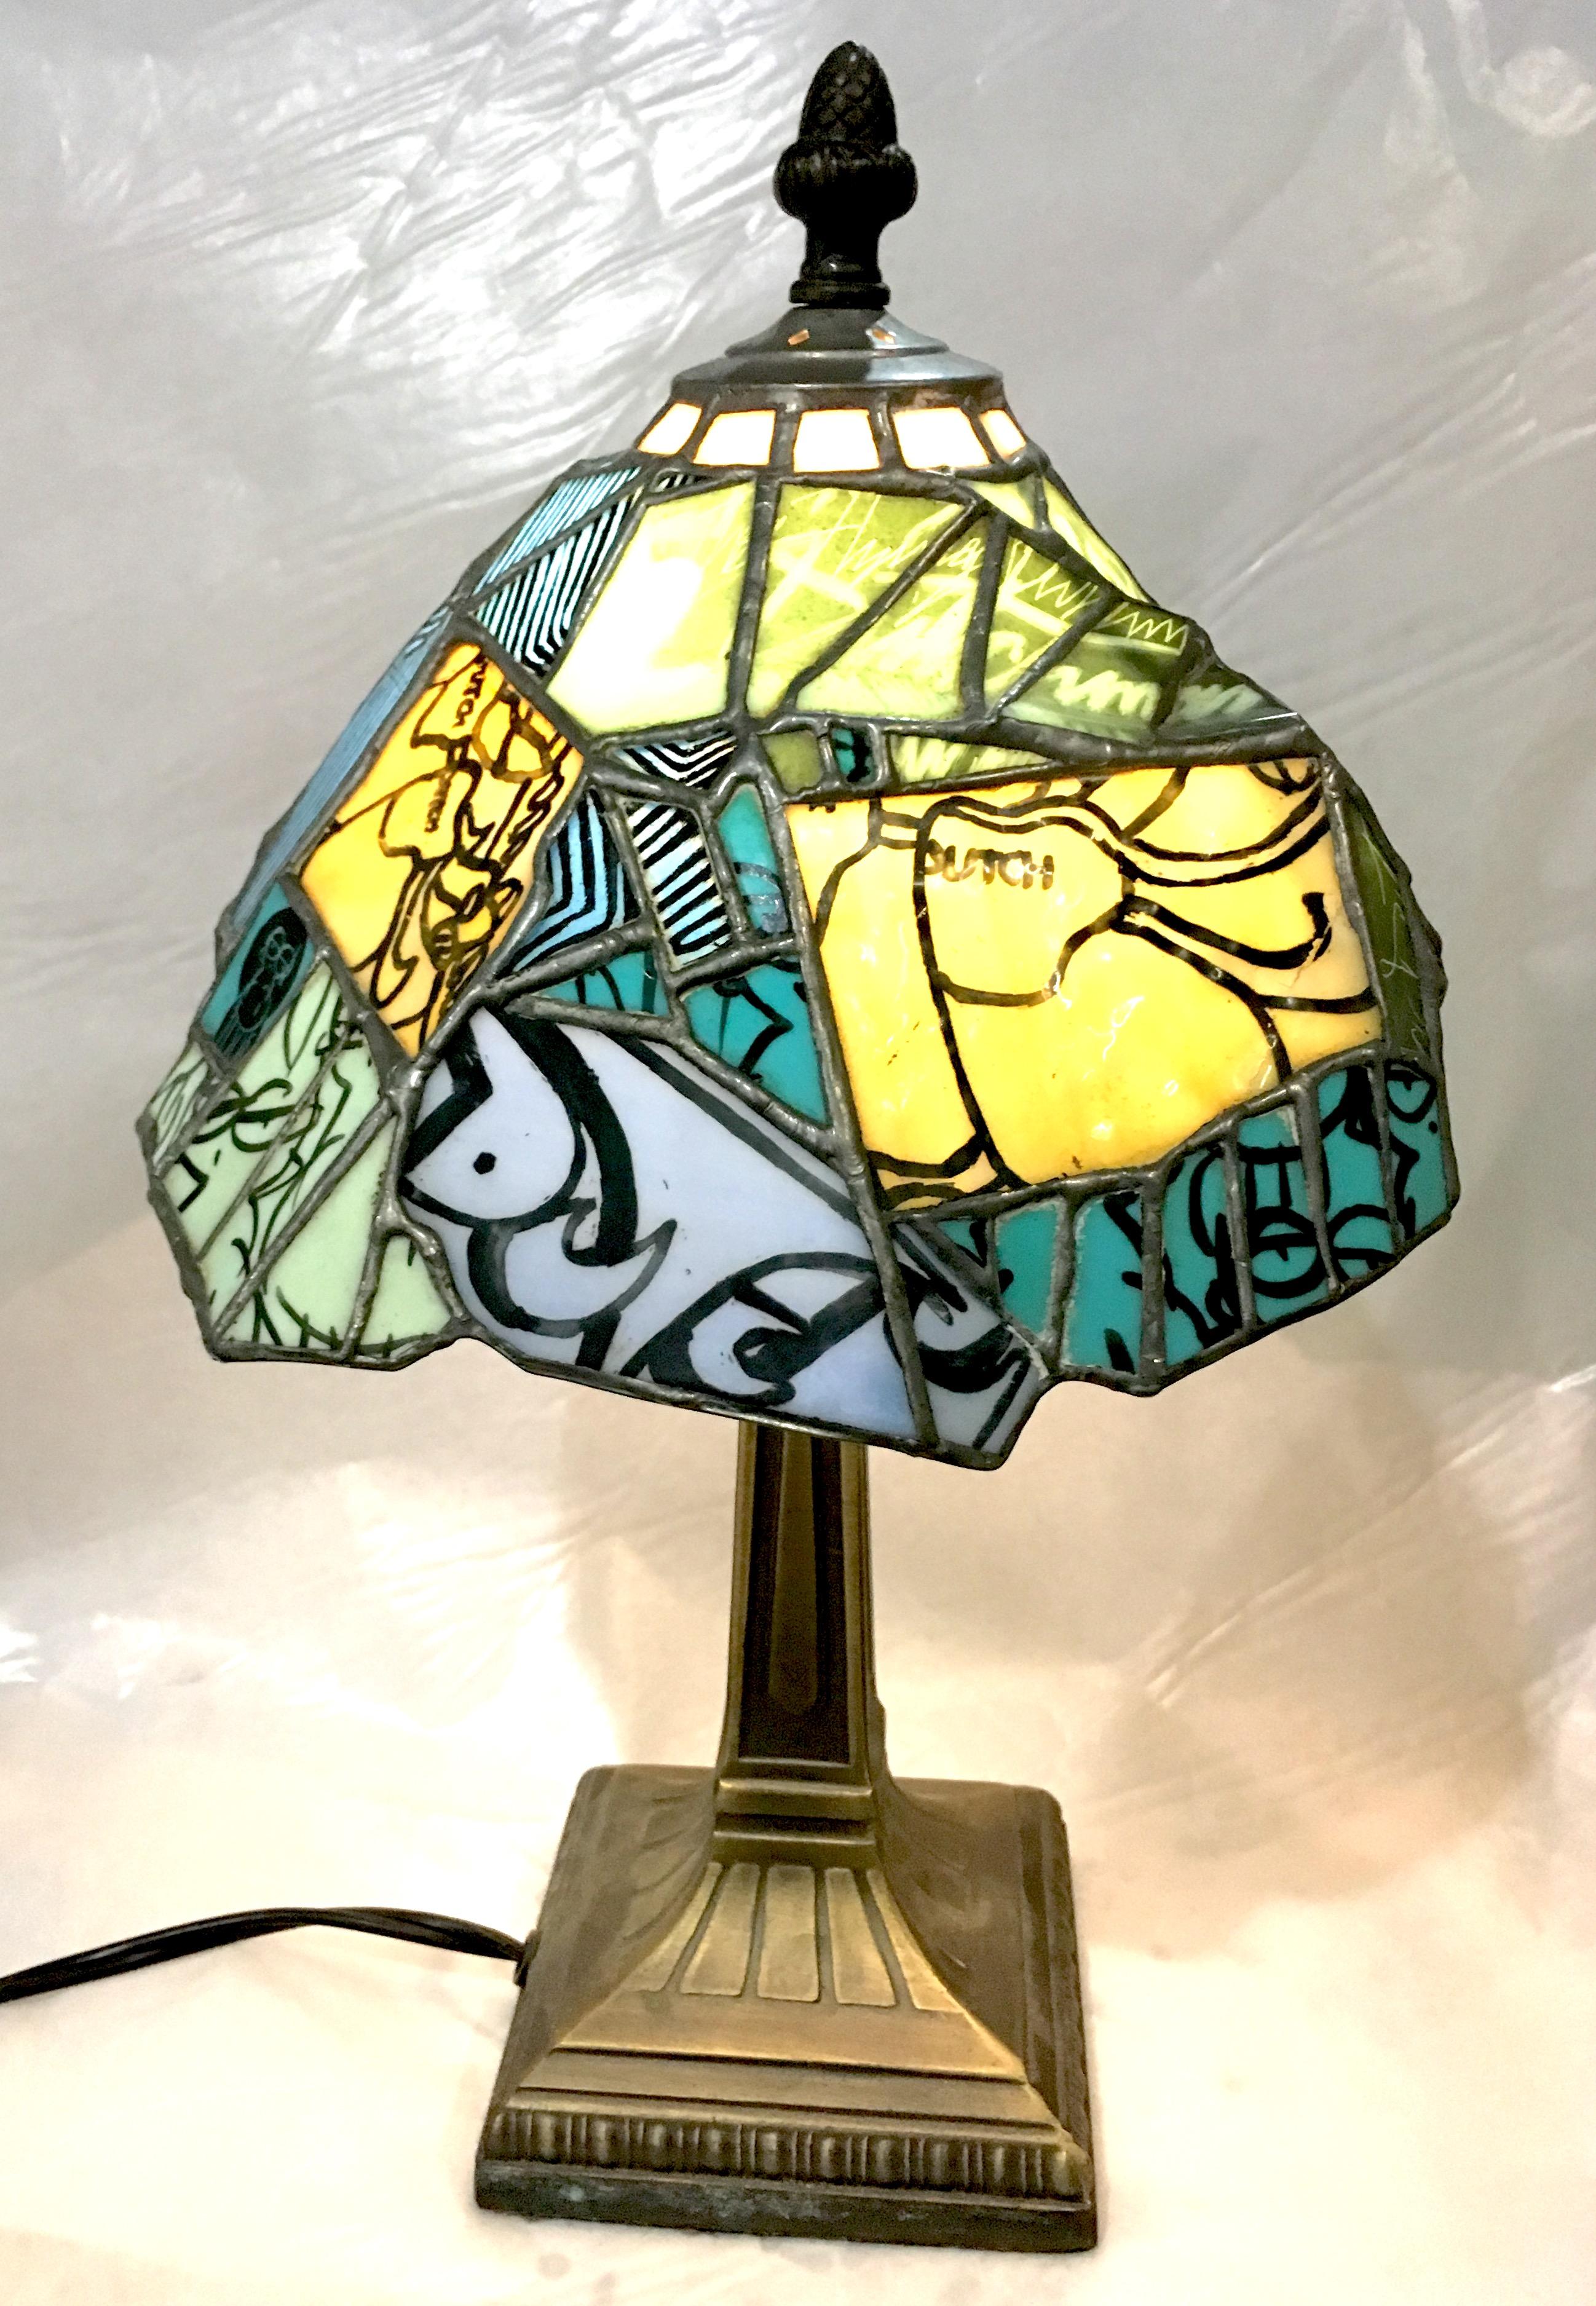 Secret Stash, 2012 (stained glass lamp)